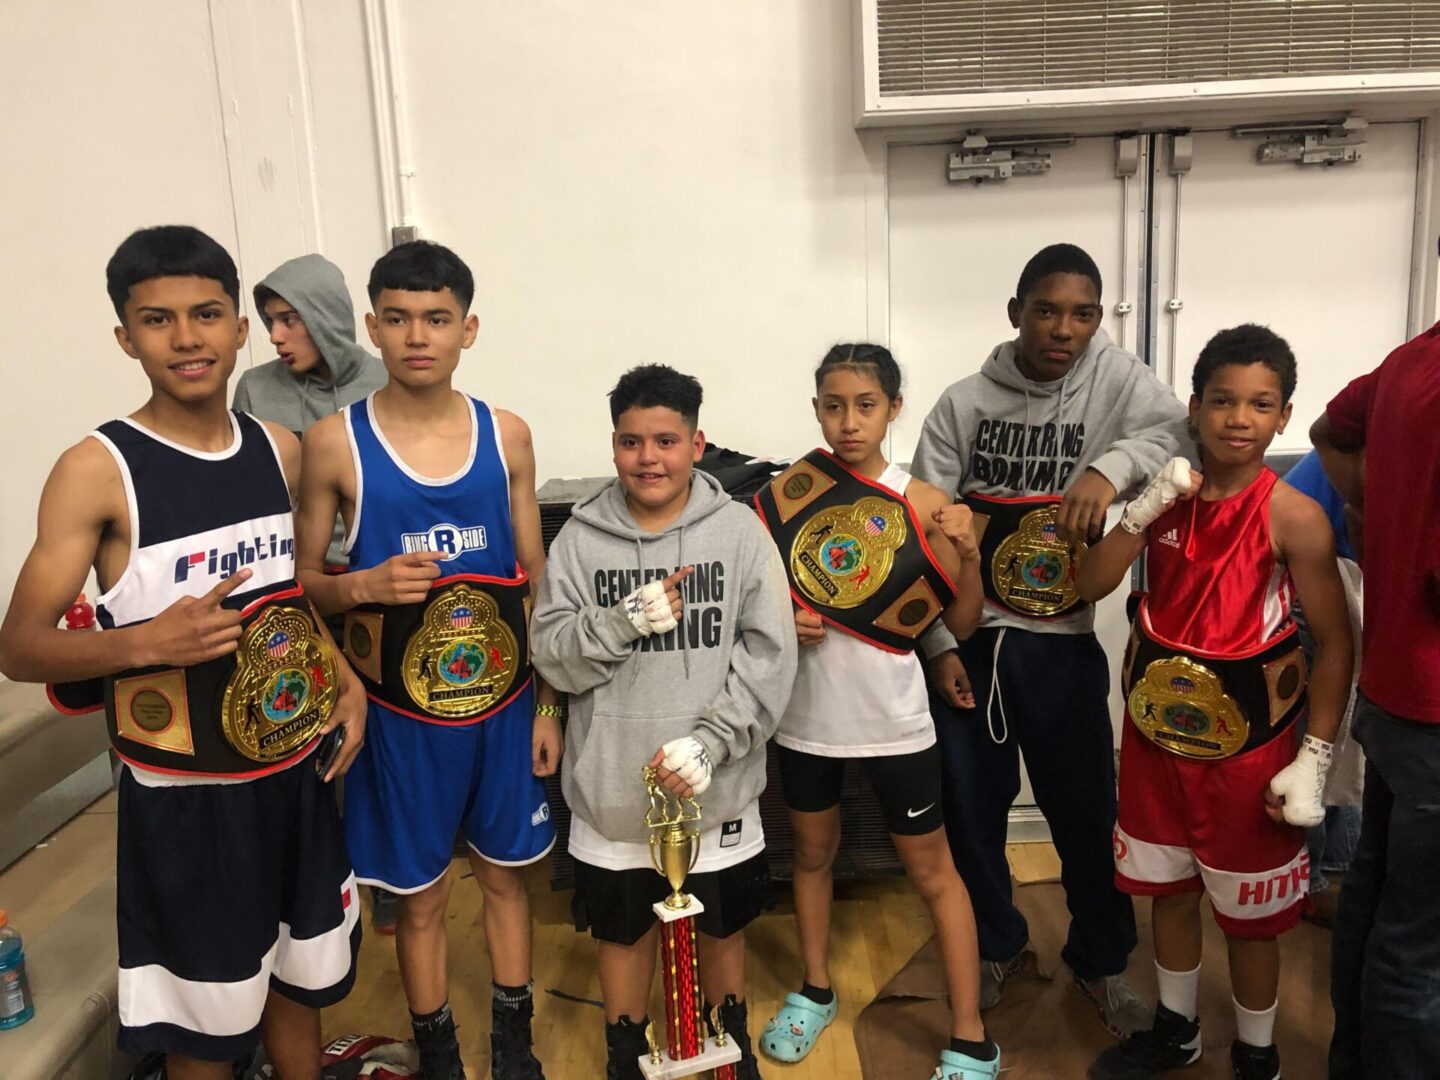 A Group of Boys Holding Awards in Boxing Gear